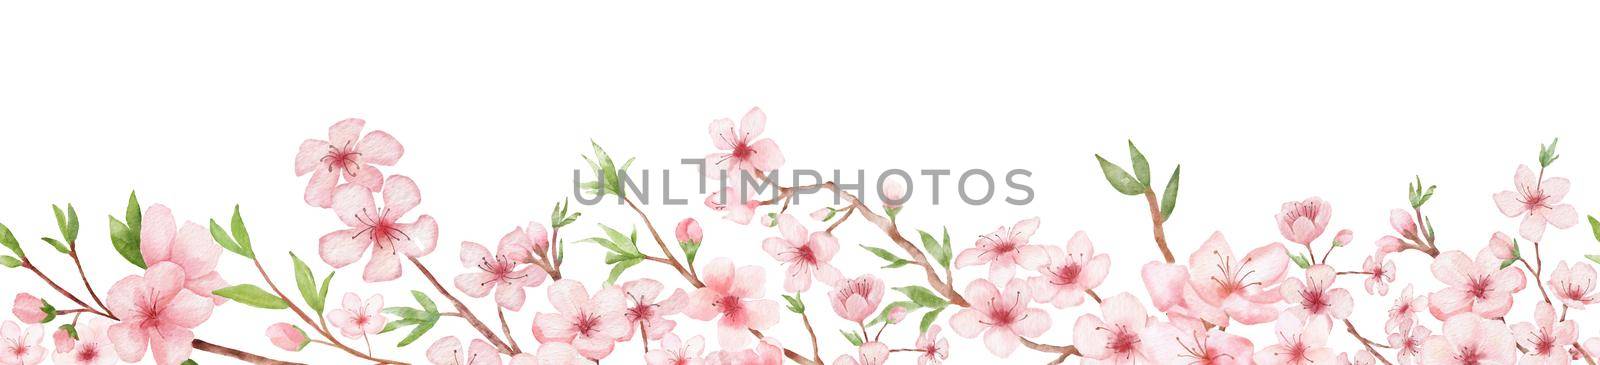 Branch of Cherry blossom watercolor seamless border on white backgraund. Japanese flowers frame. Floral pink background by ElenaPlatova